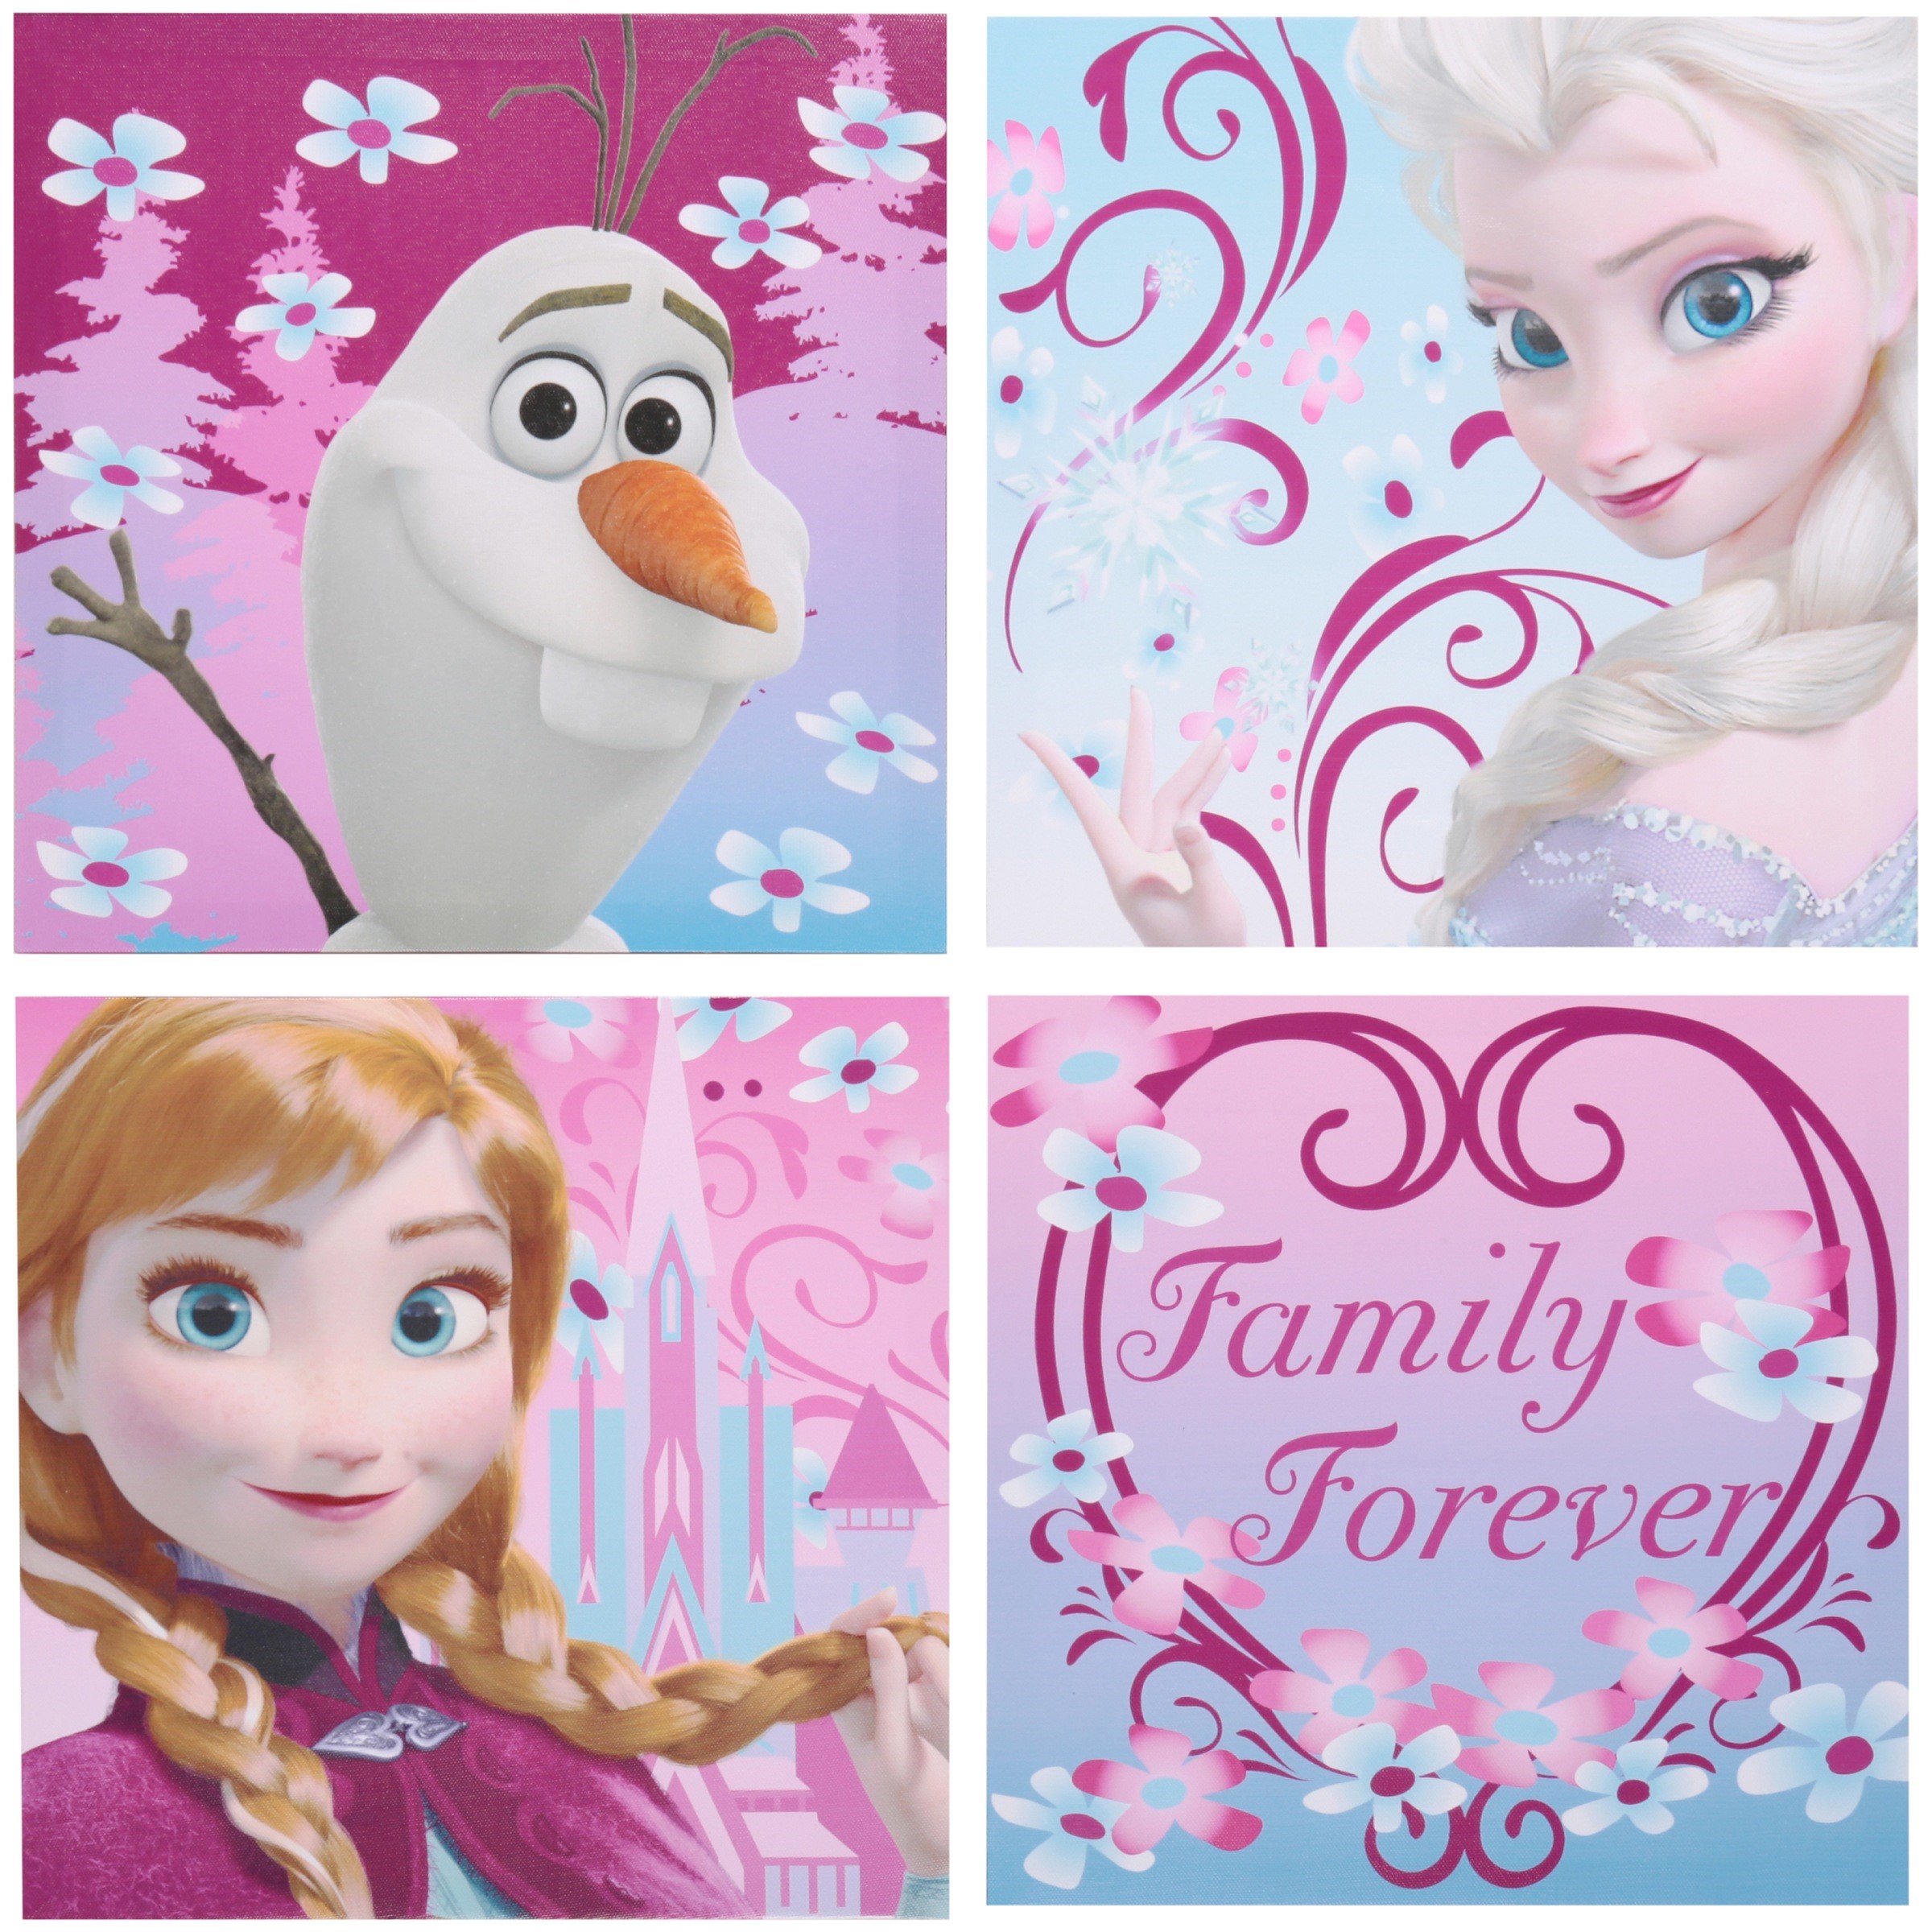 Disney Frozen Canvas Wall Art 4 pc Pack - image 1 of 4